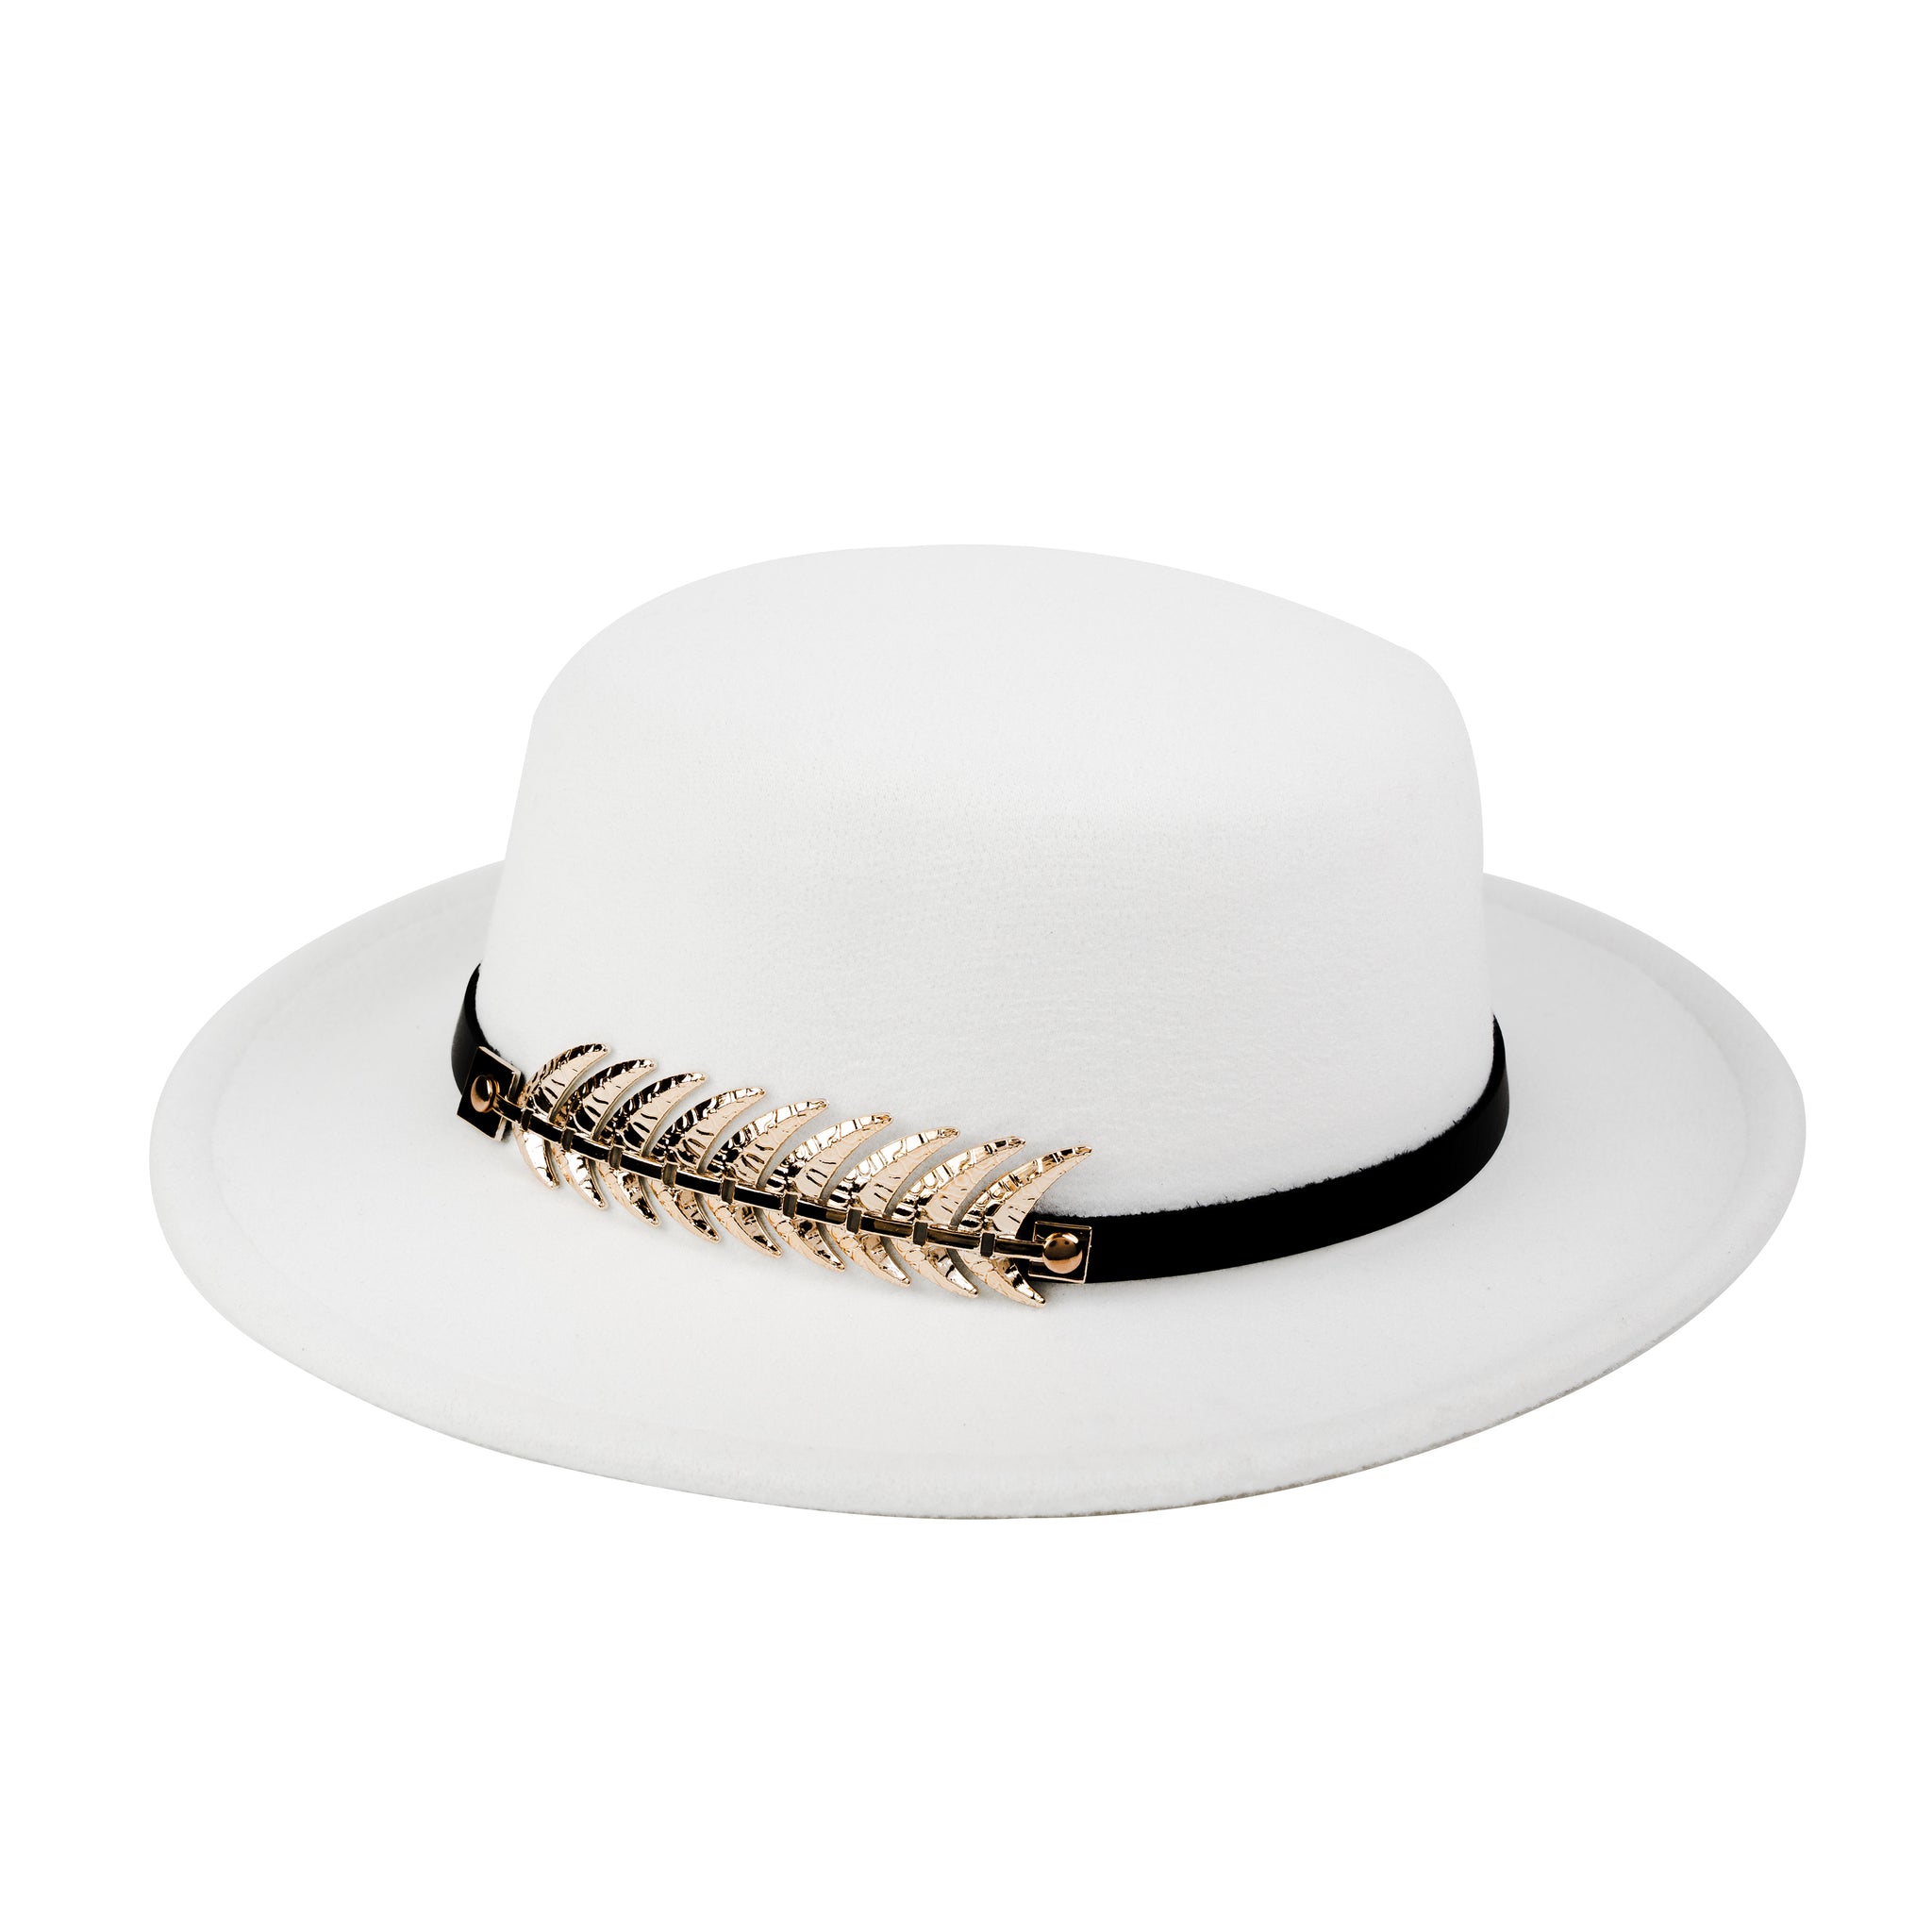 Chokore Party Panama Hat with Leaf Buckle (White)